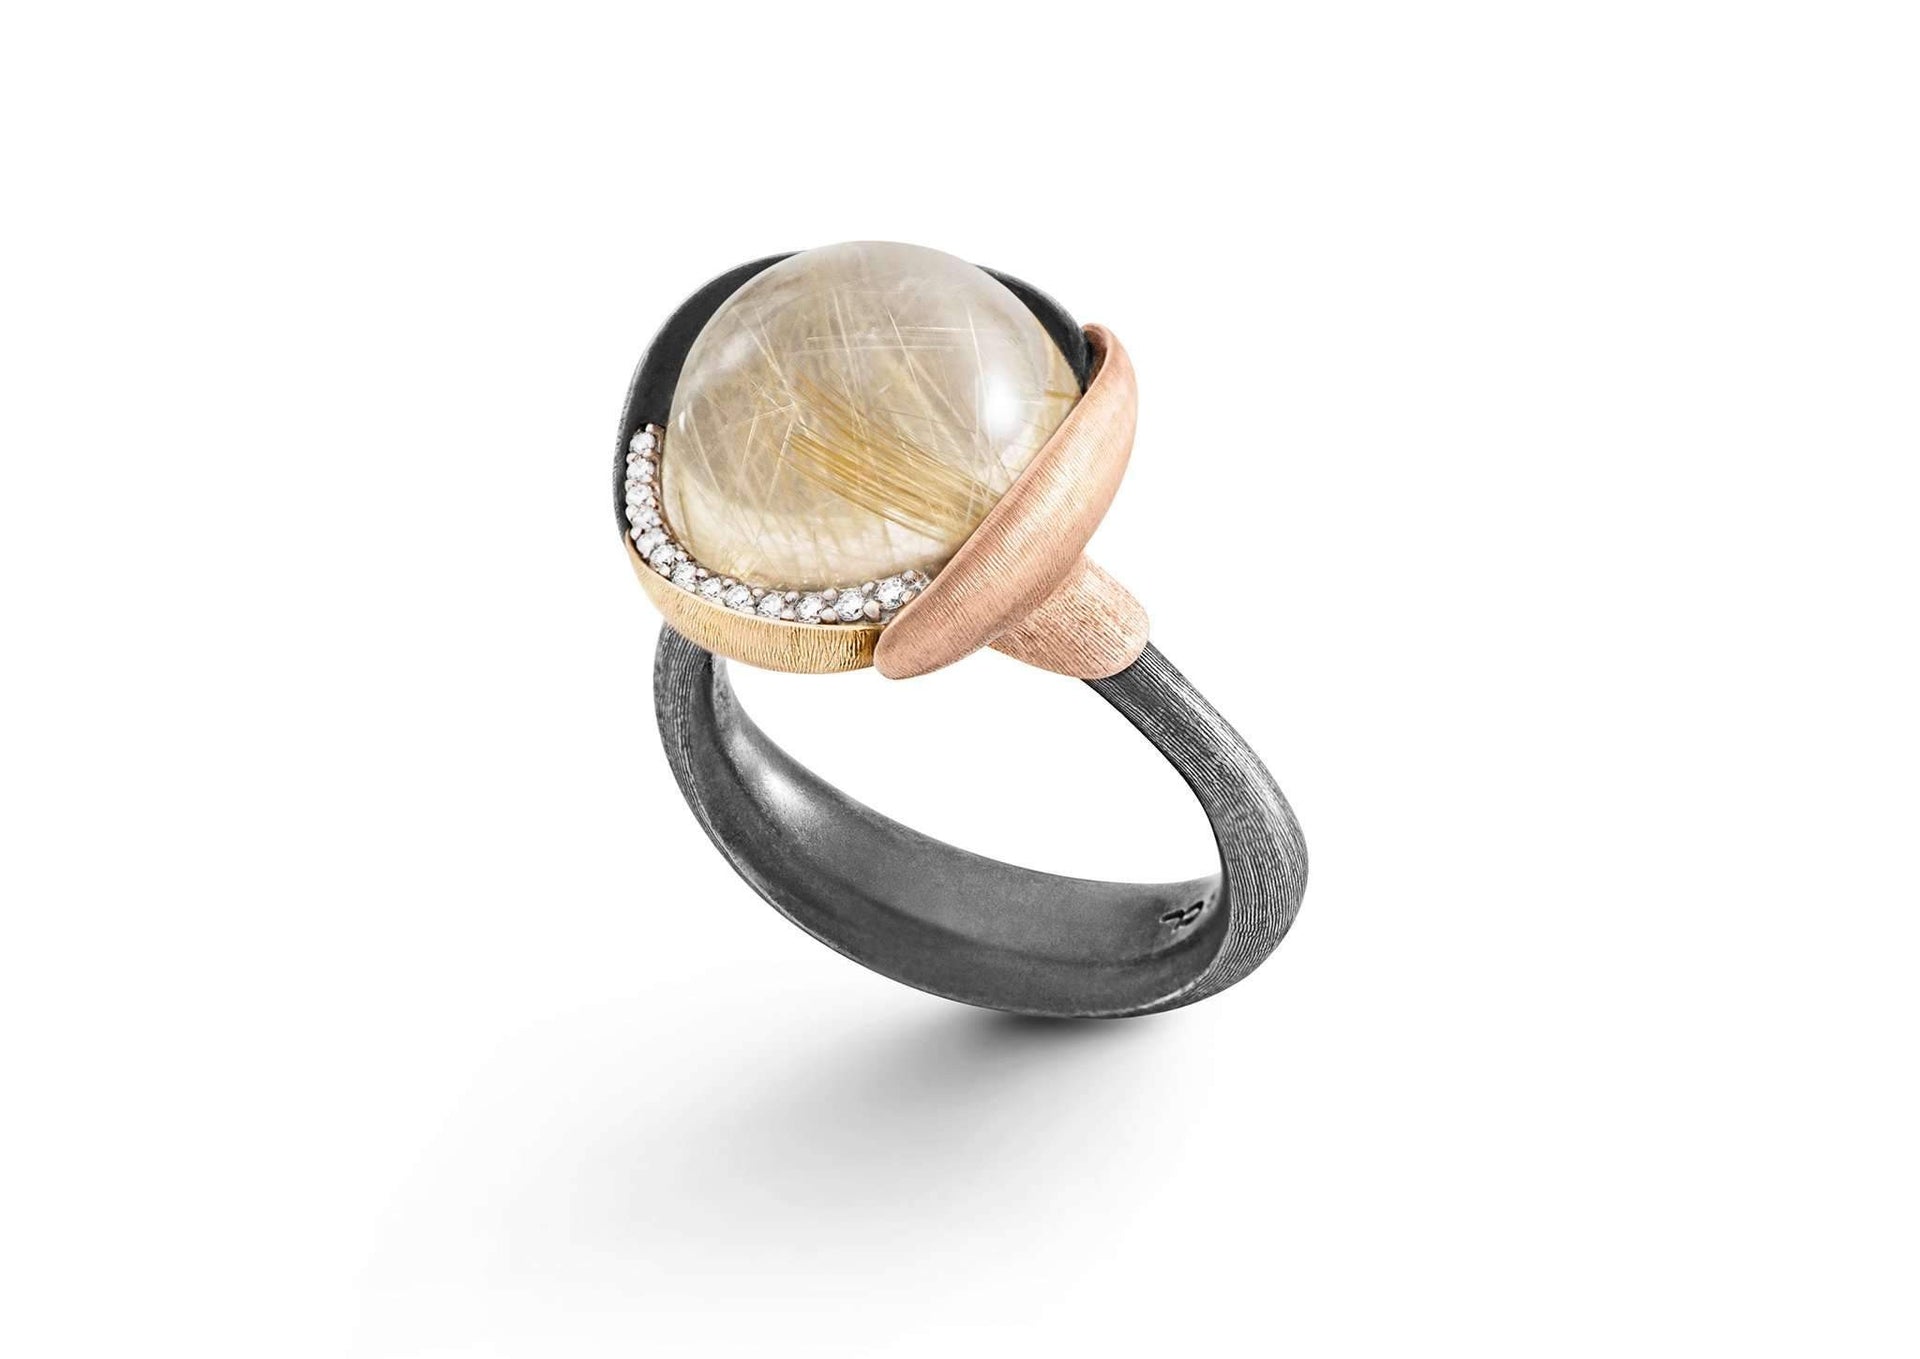 Lotus Ring in Gold and Silver with Rutile Quartz and Diamonds